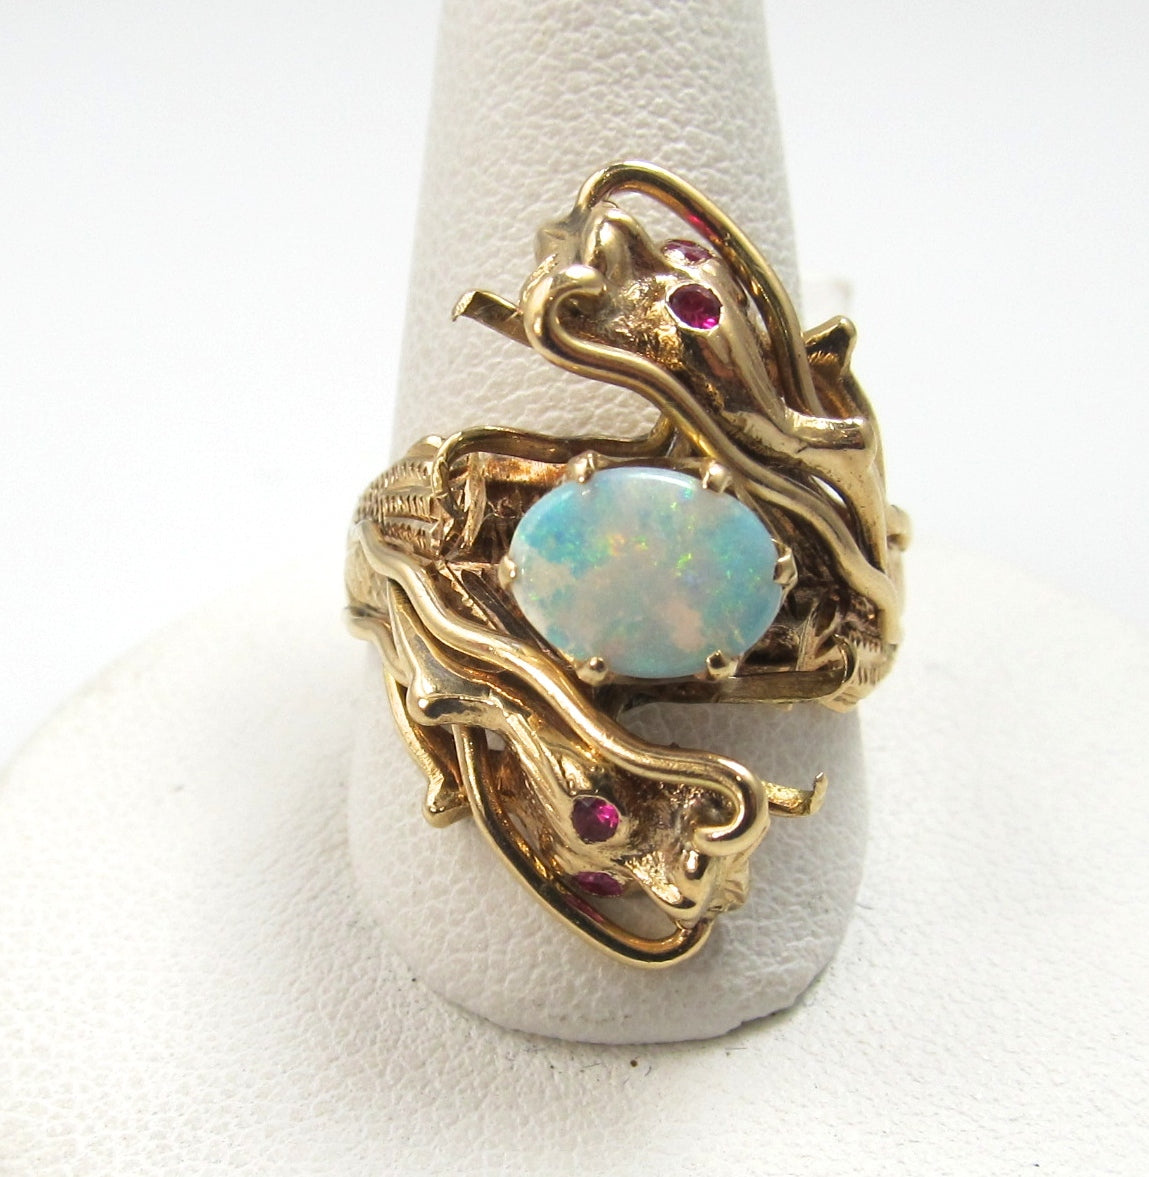 14k Rose Gold Dragon Ring With Rubies And An Opal, Circa 1930